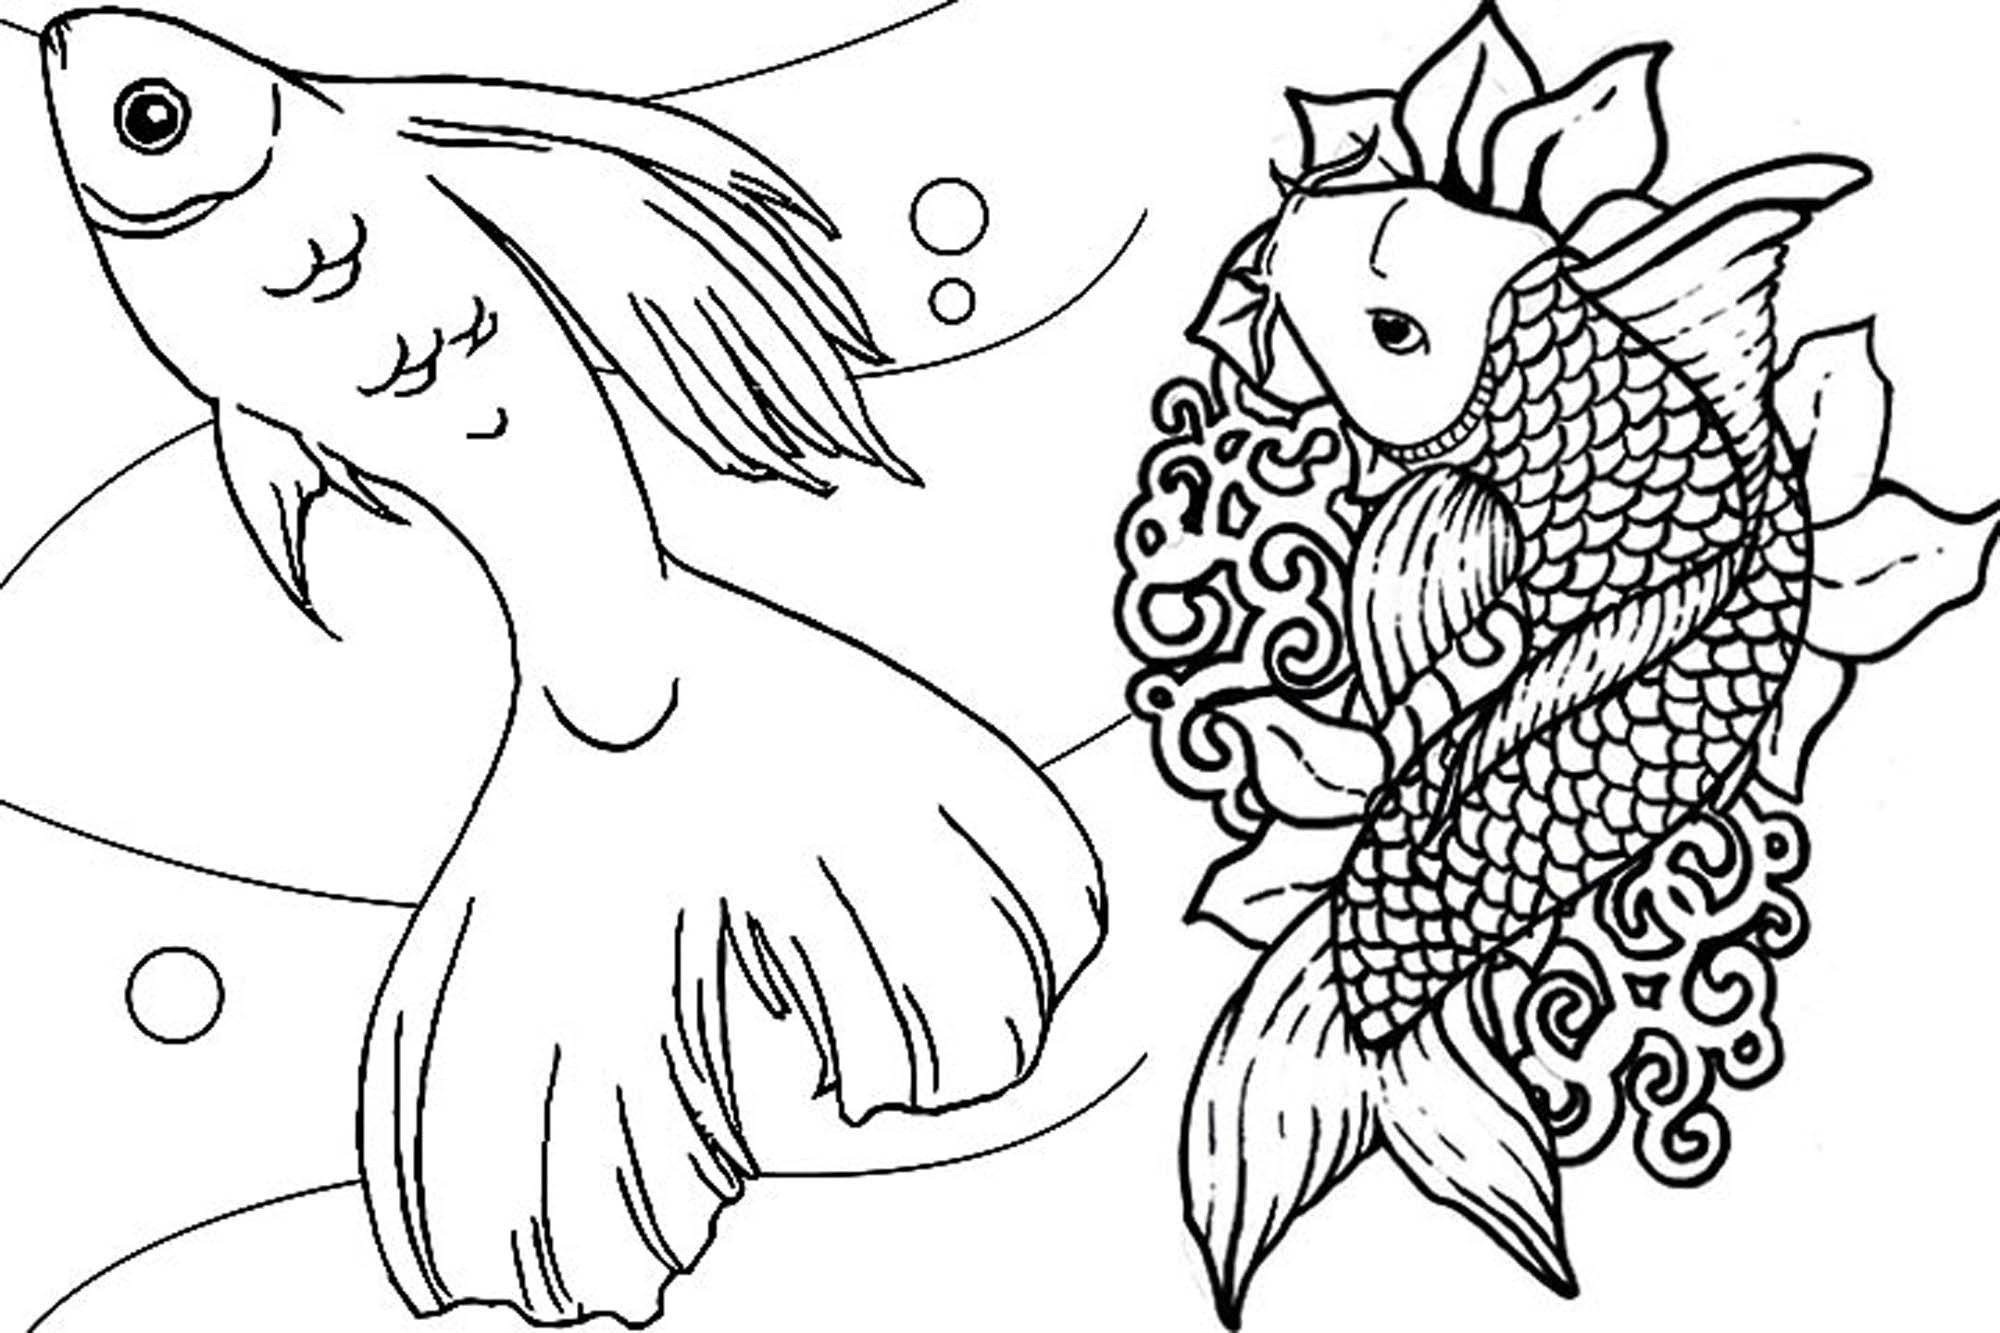 Fish Adult Coloring Pages
 Print & Download Cute and Educative Fish Coloring Pages